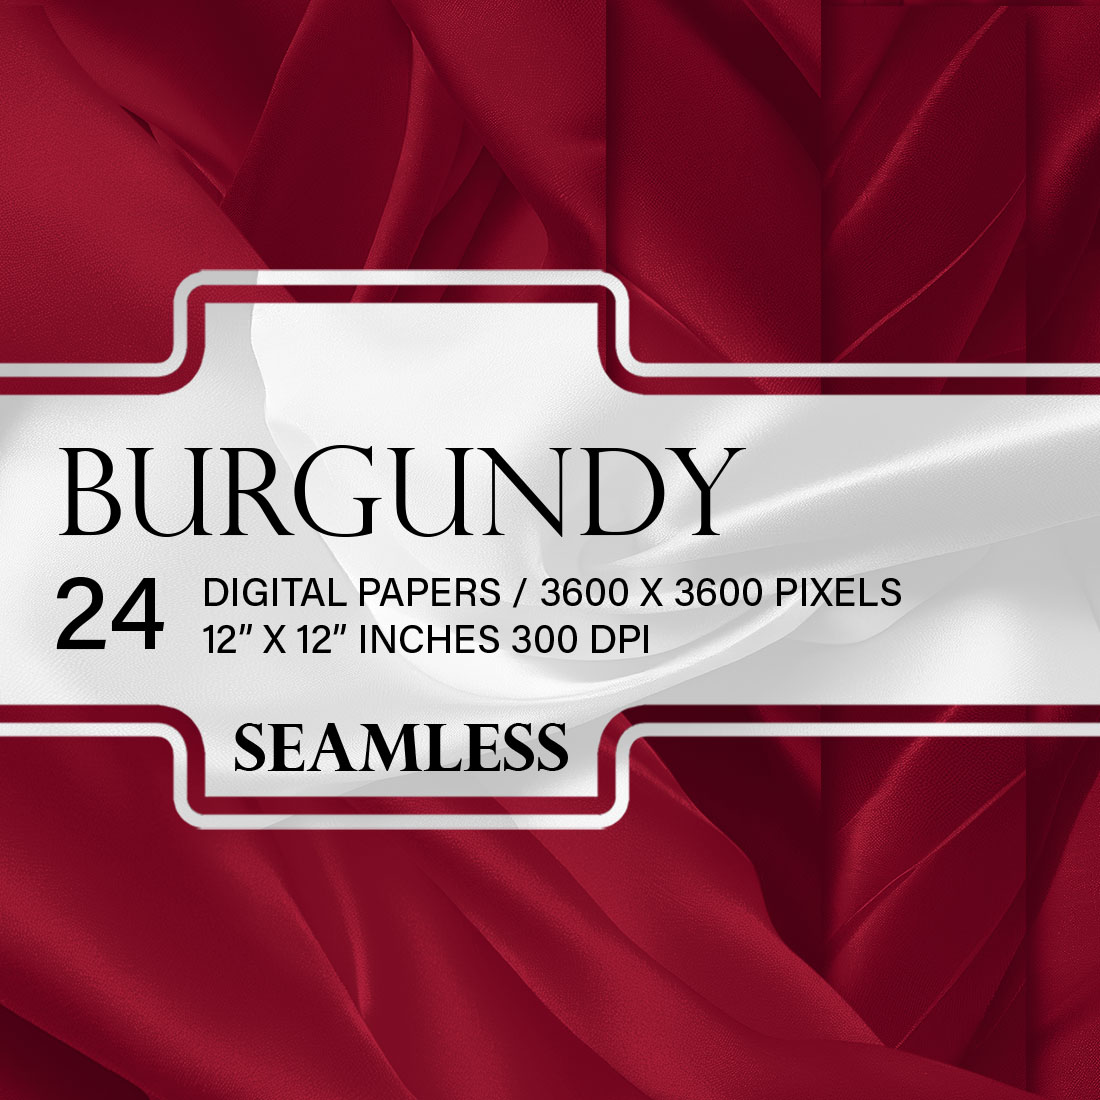 Image with exquisite burgundy silk background.